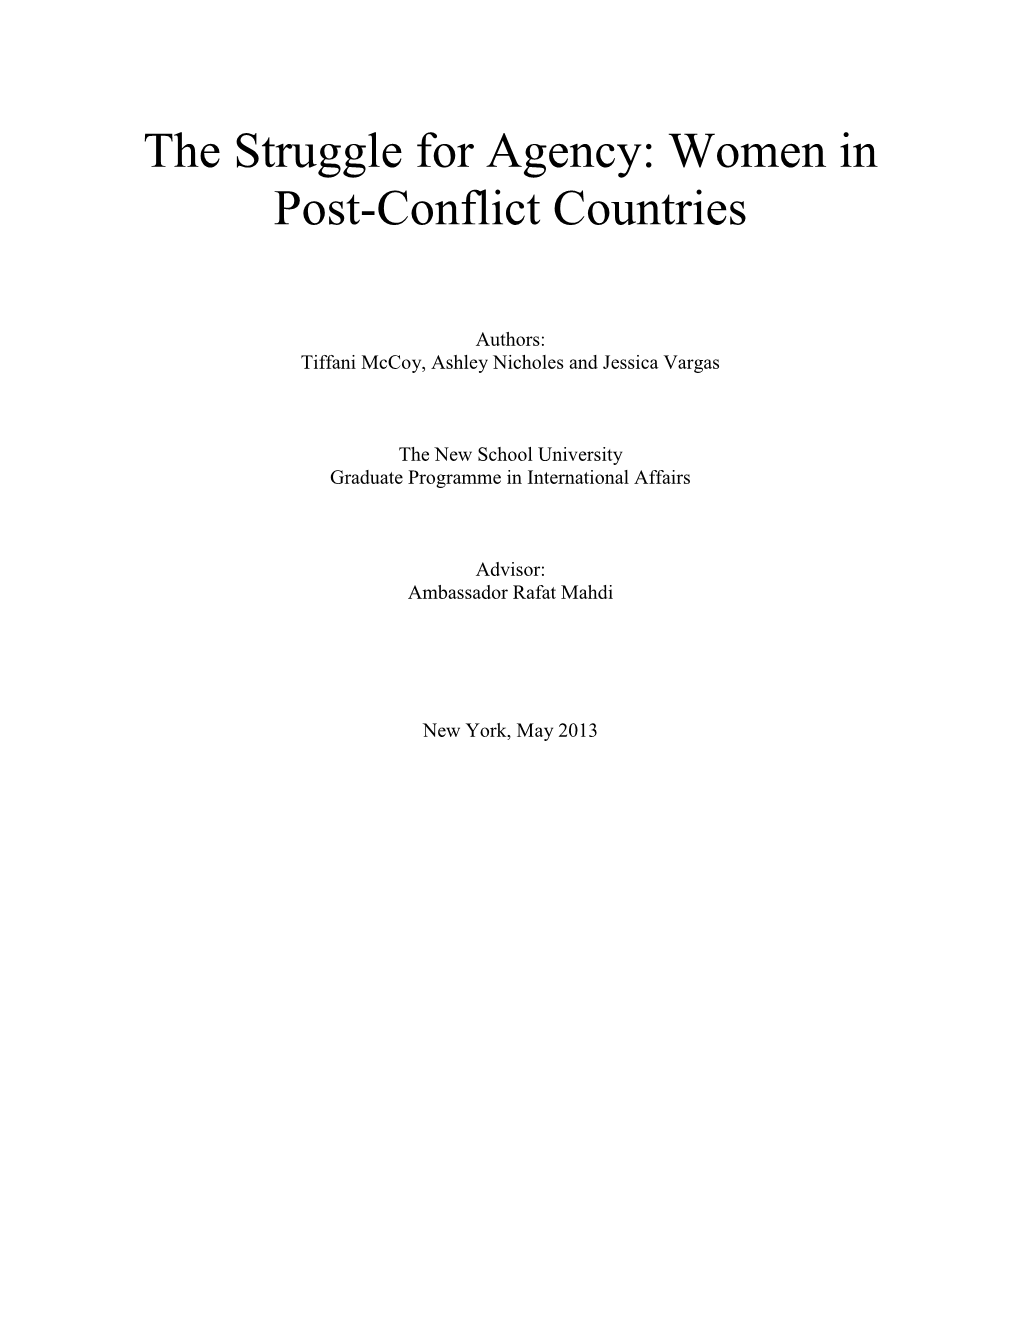 The Struggle for Agency: Women in Post-Conflict Countries.Docx